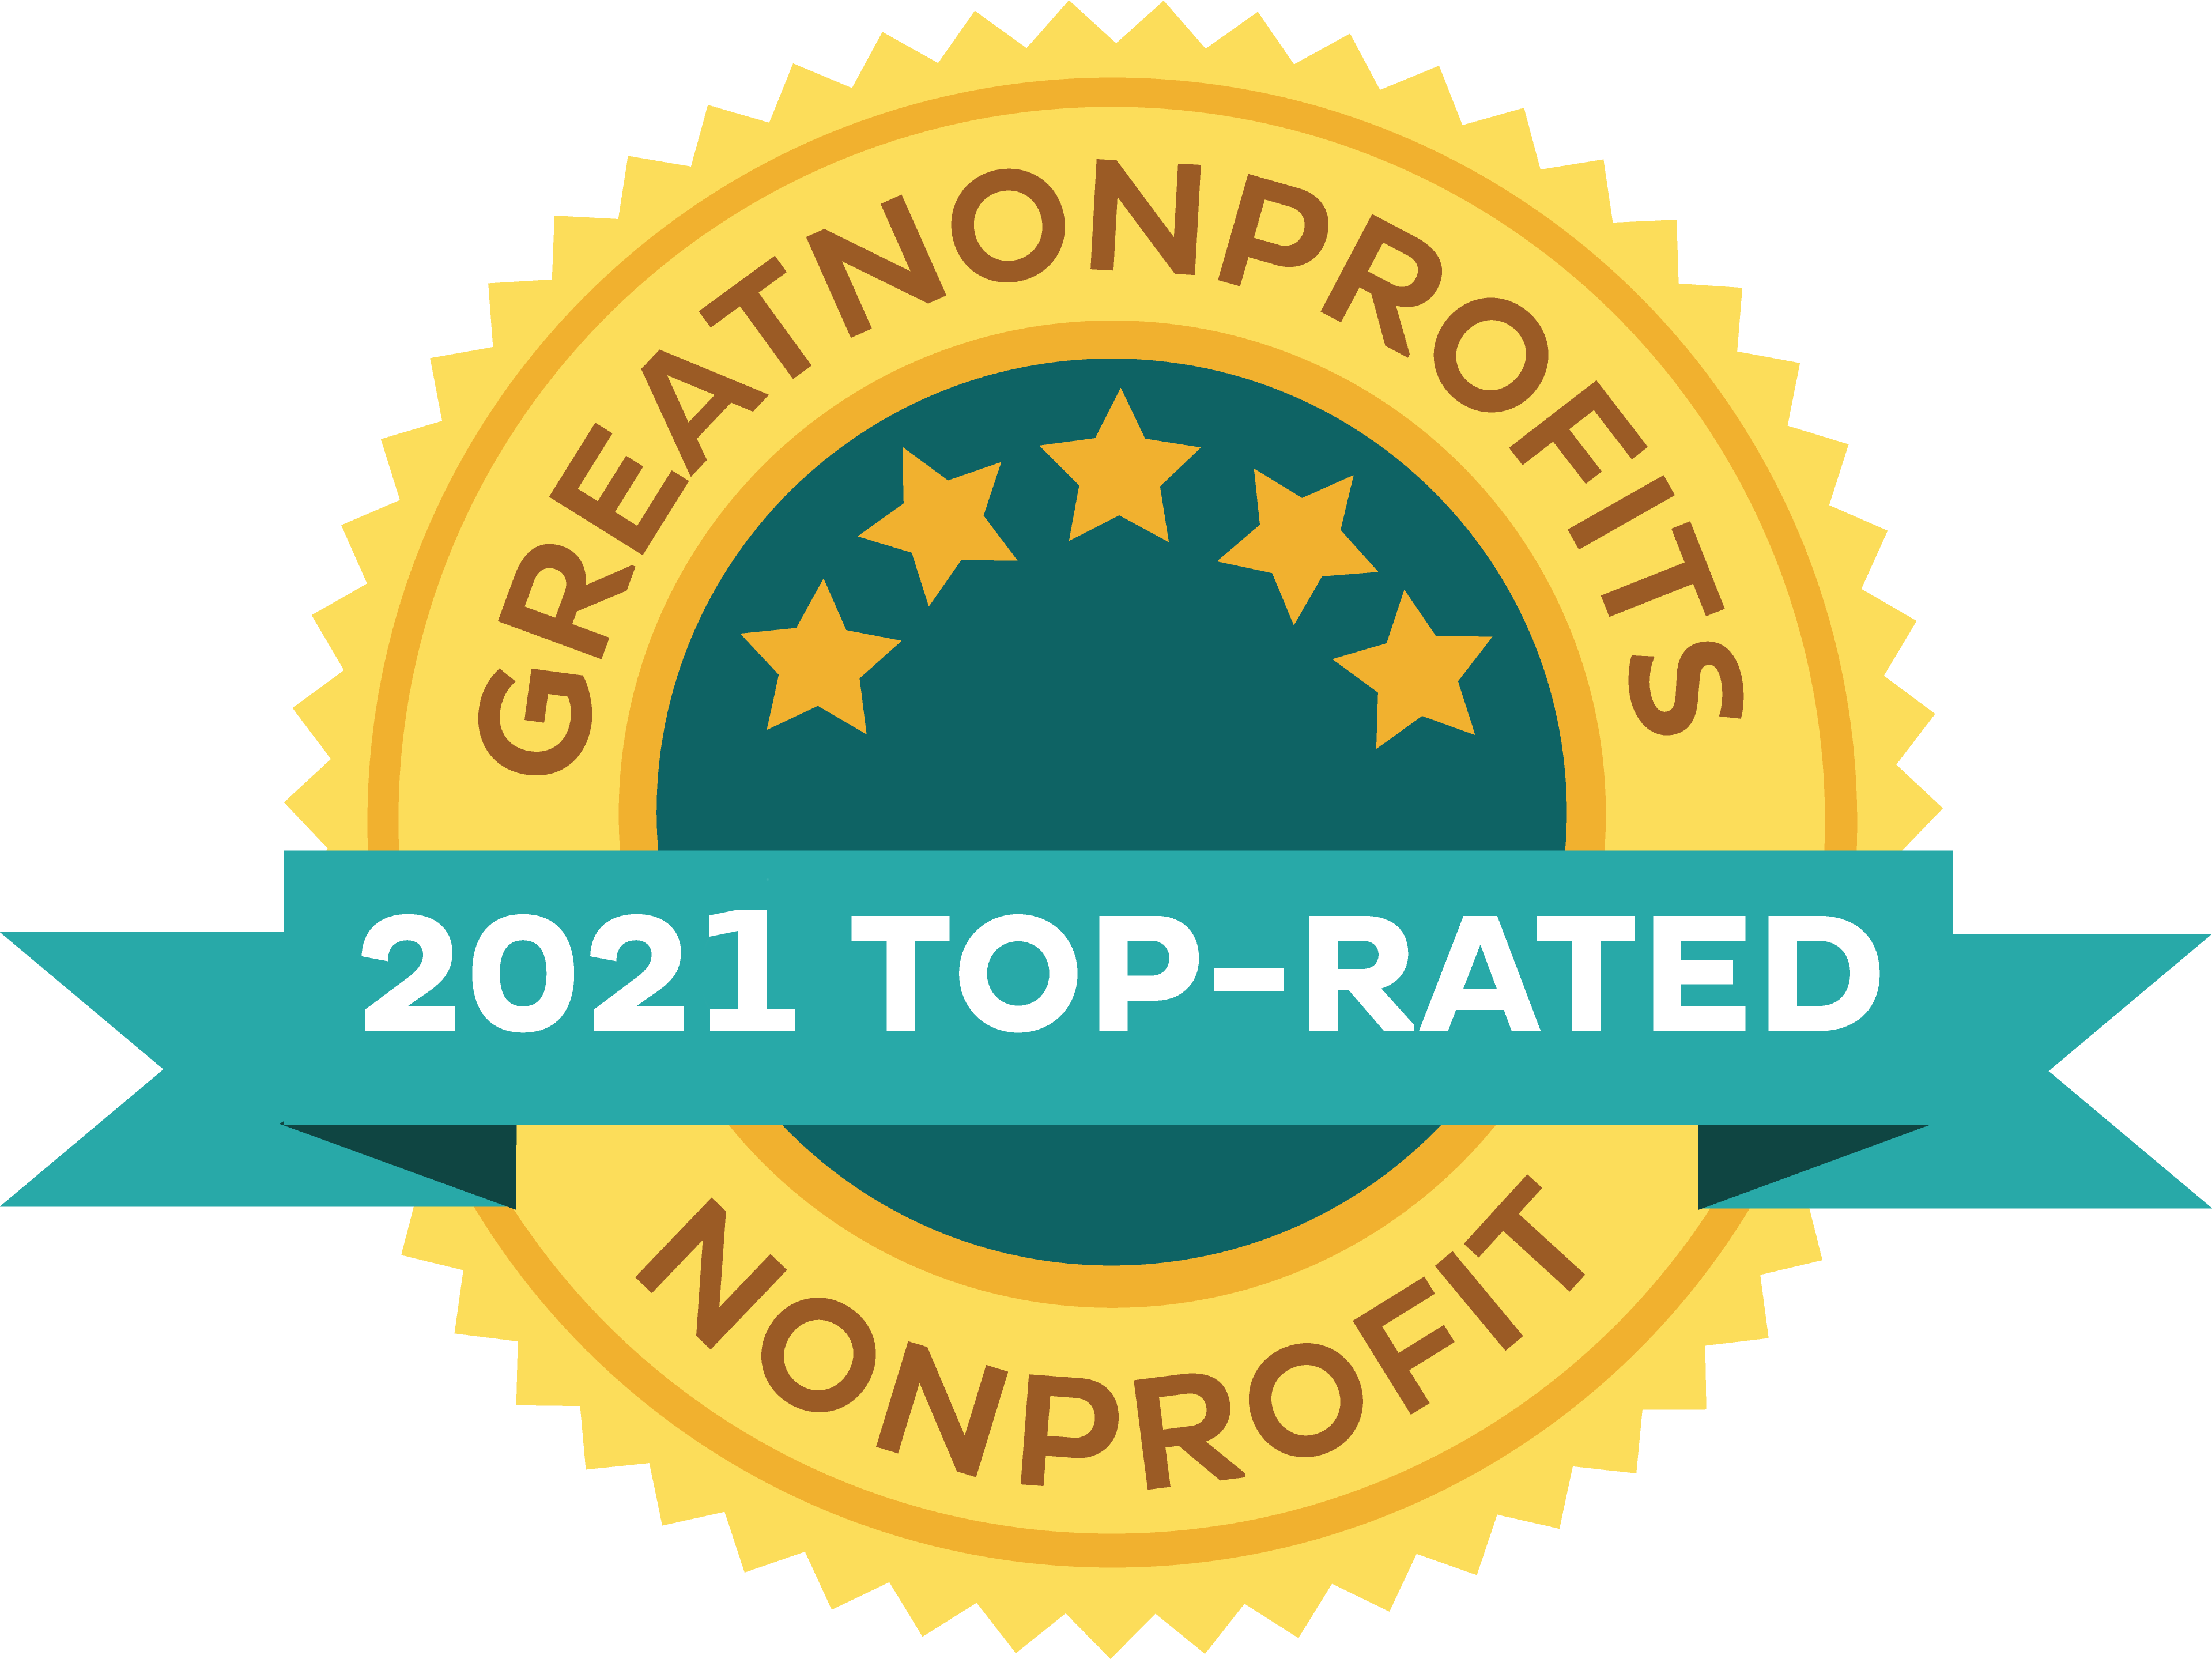 2021 Top-Rated Award from GreatNonprofits